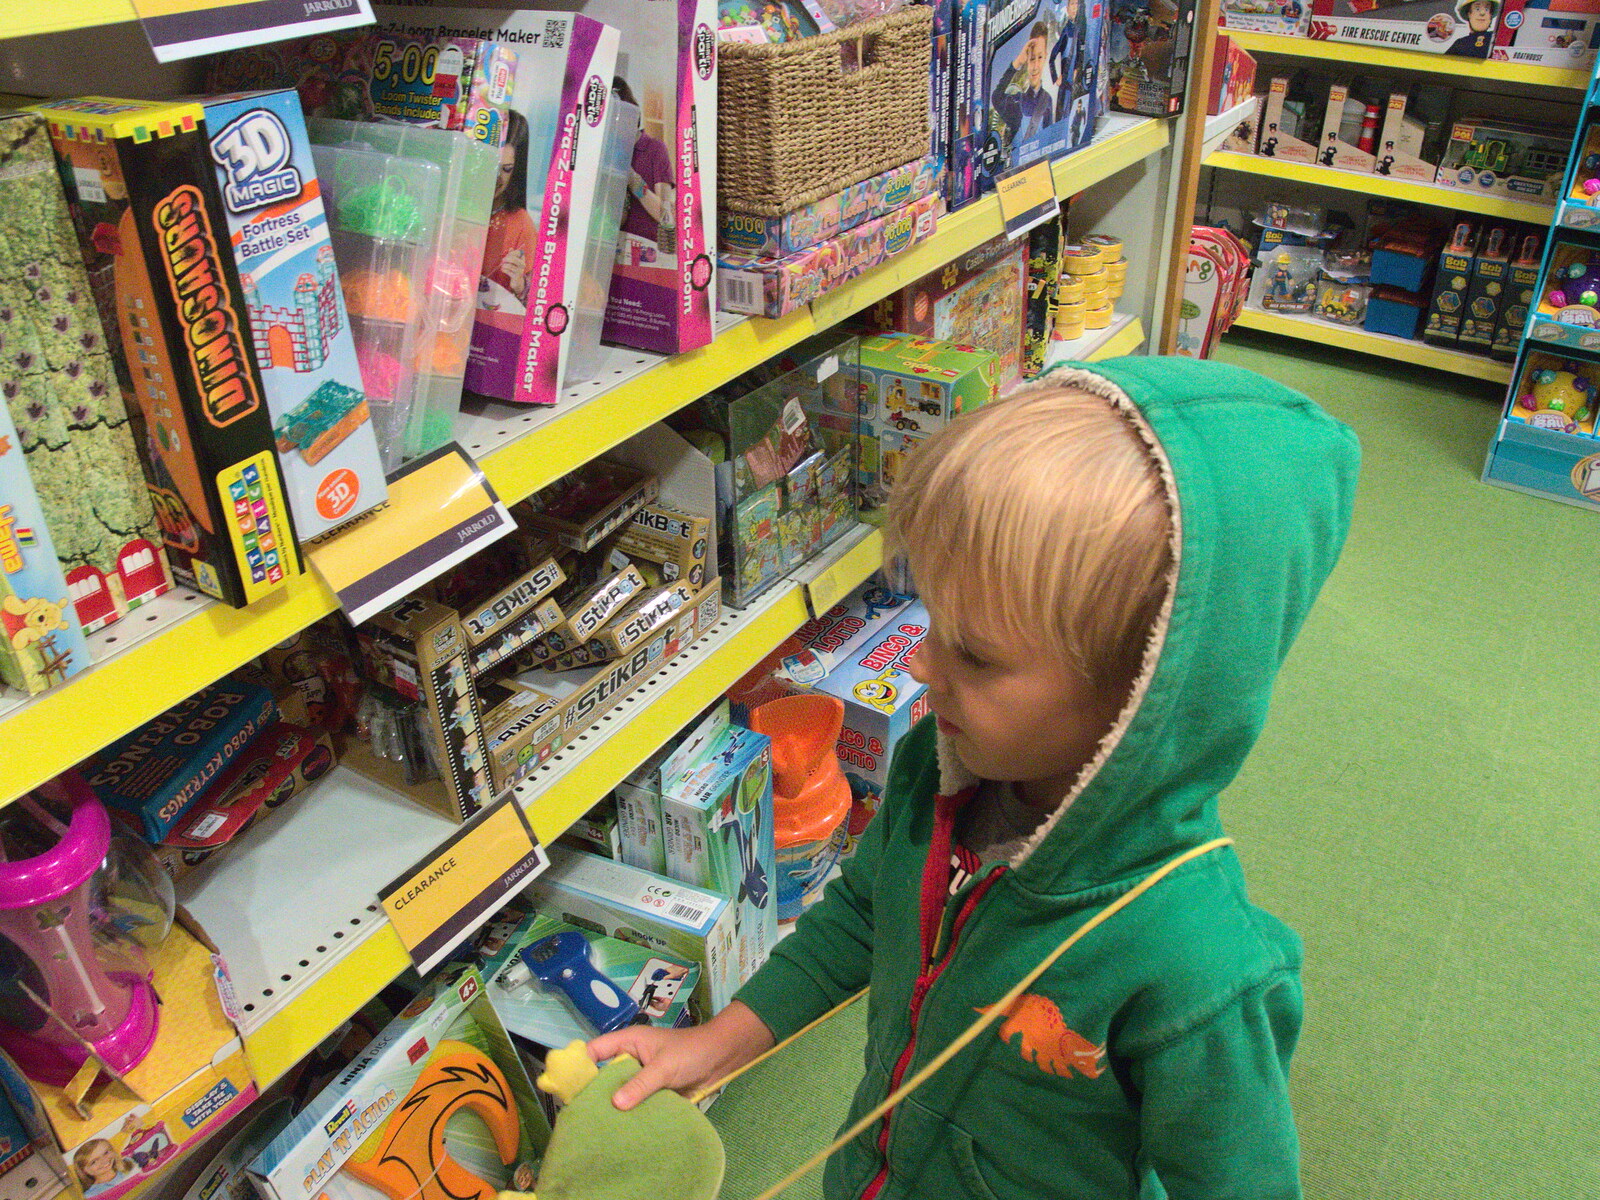 Harry in Jarrold's toy shop from An October Miscellany, Suffolk - 8th October 2016